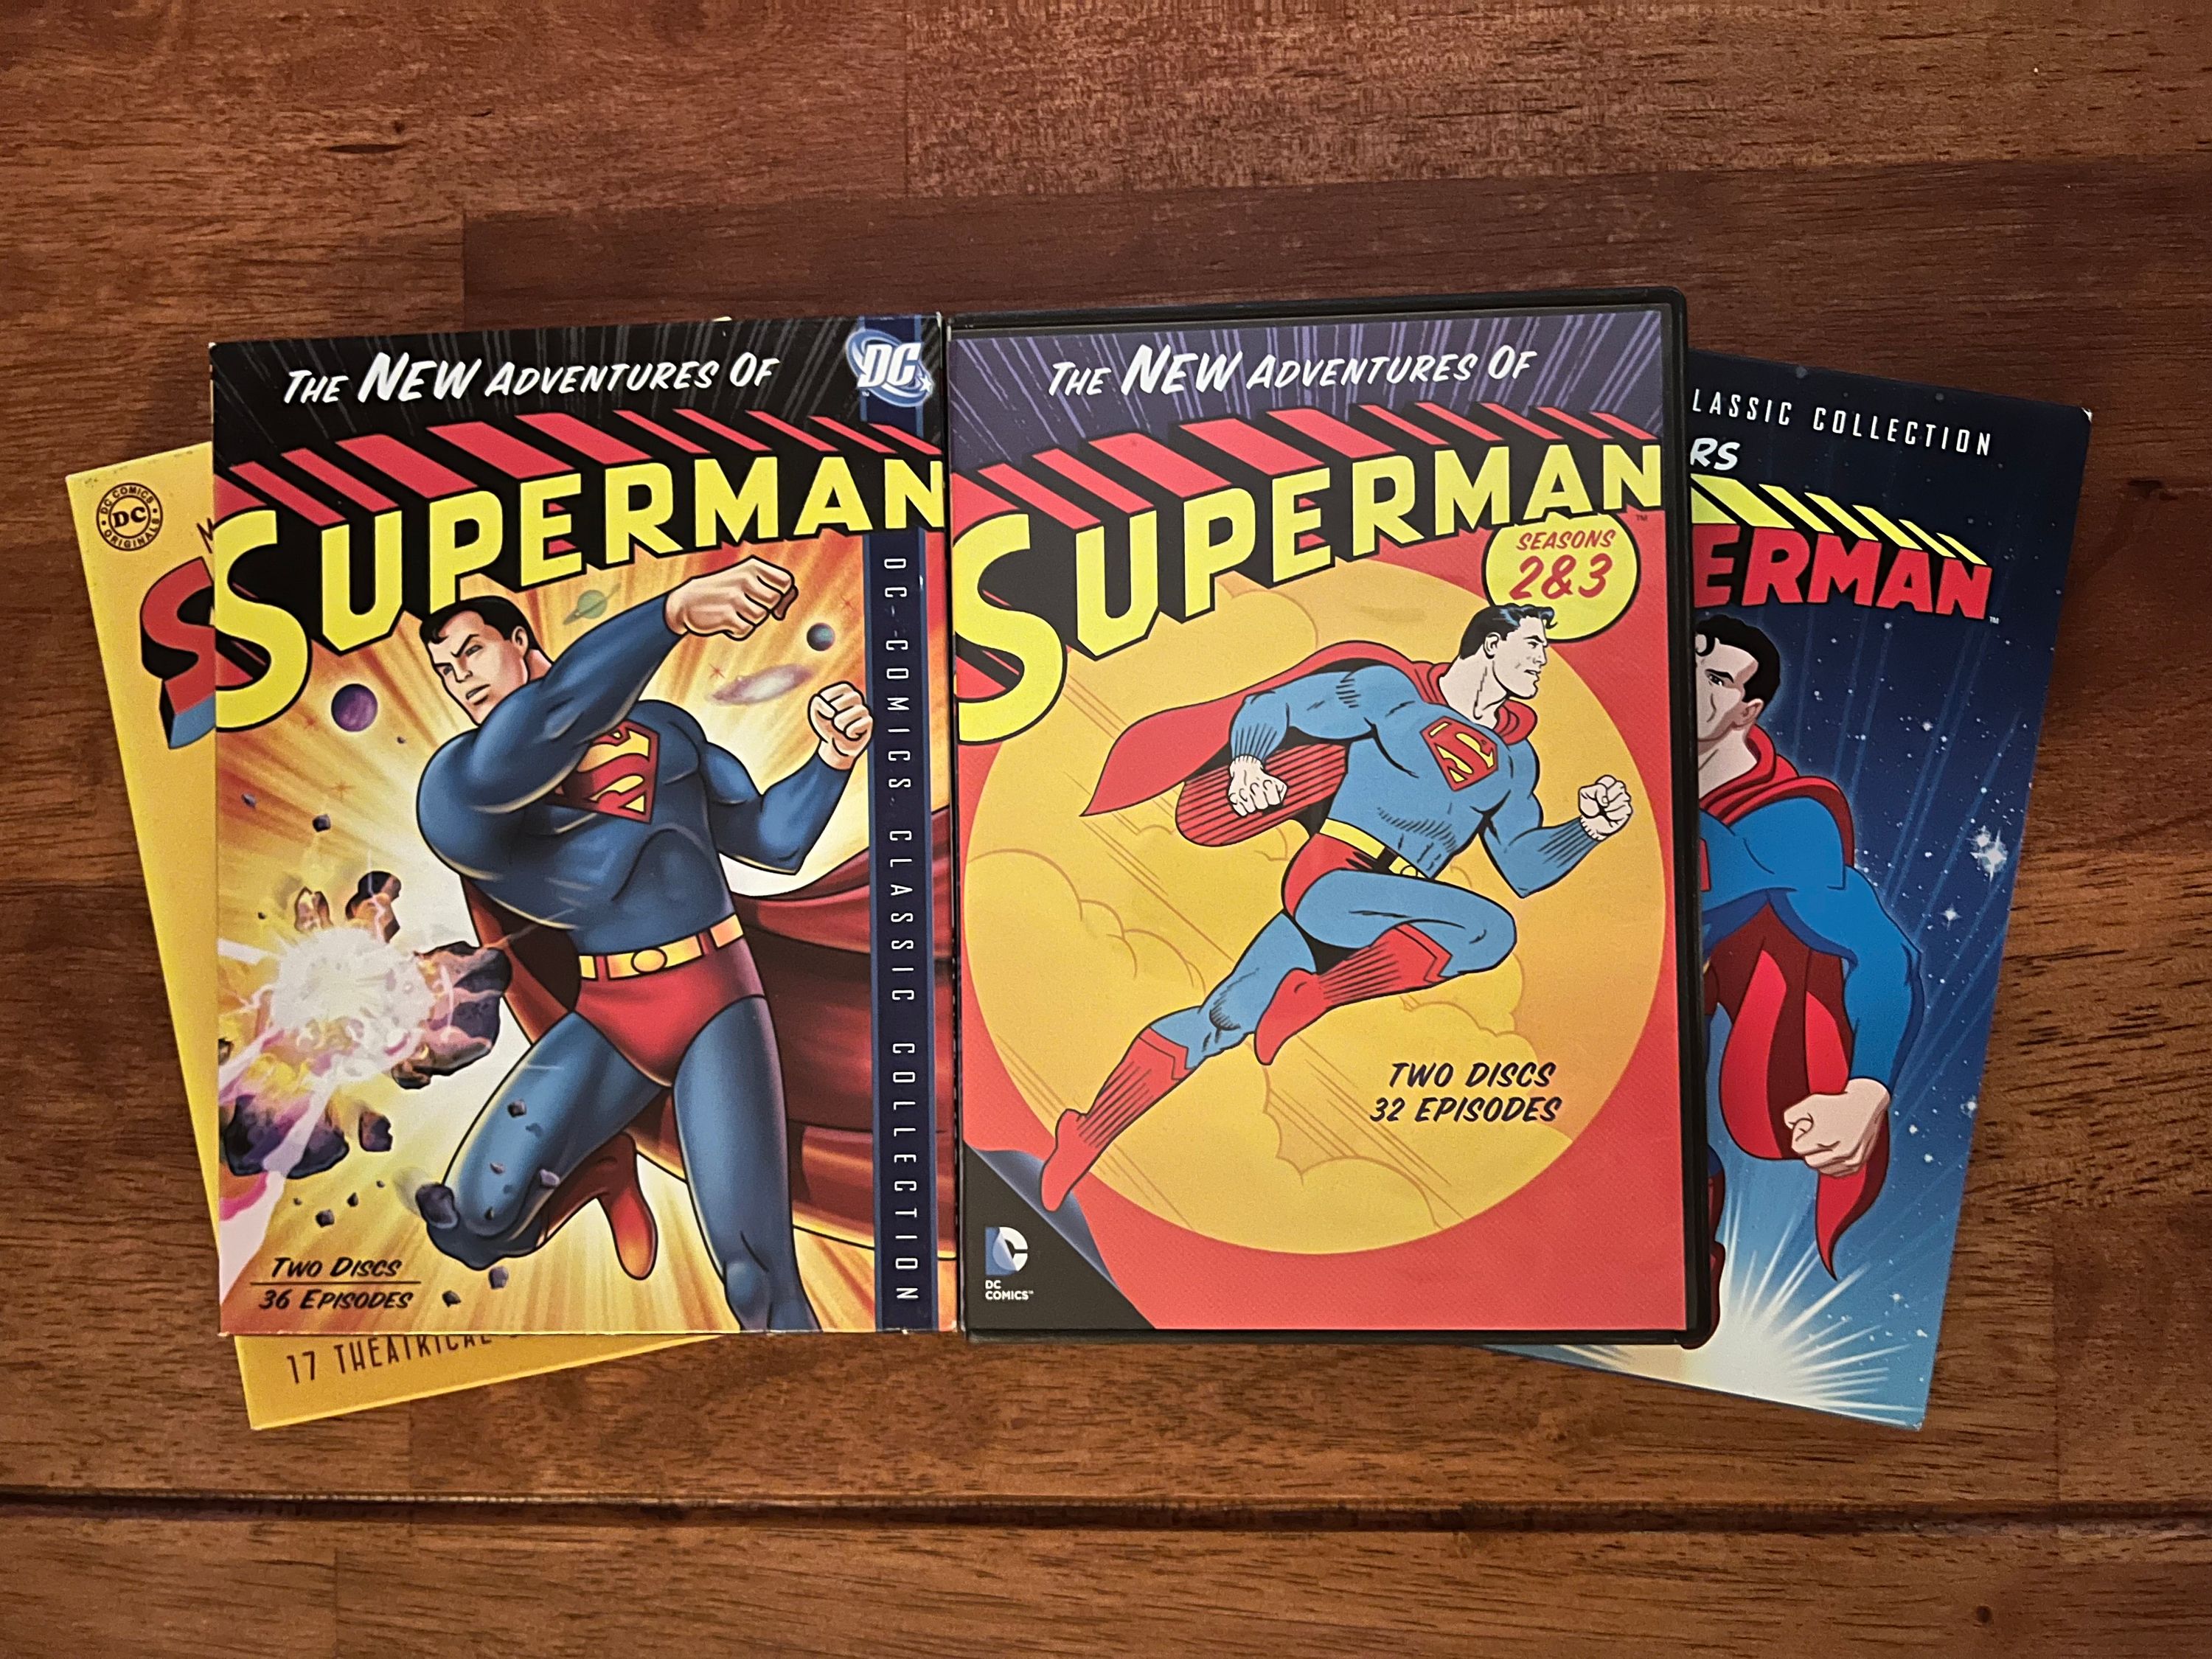 Covers for the DVD releases of various Superman cartoons with the filmation The New Adventures of Superma volumes one and two on top.